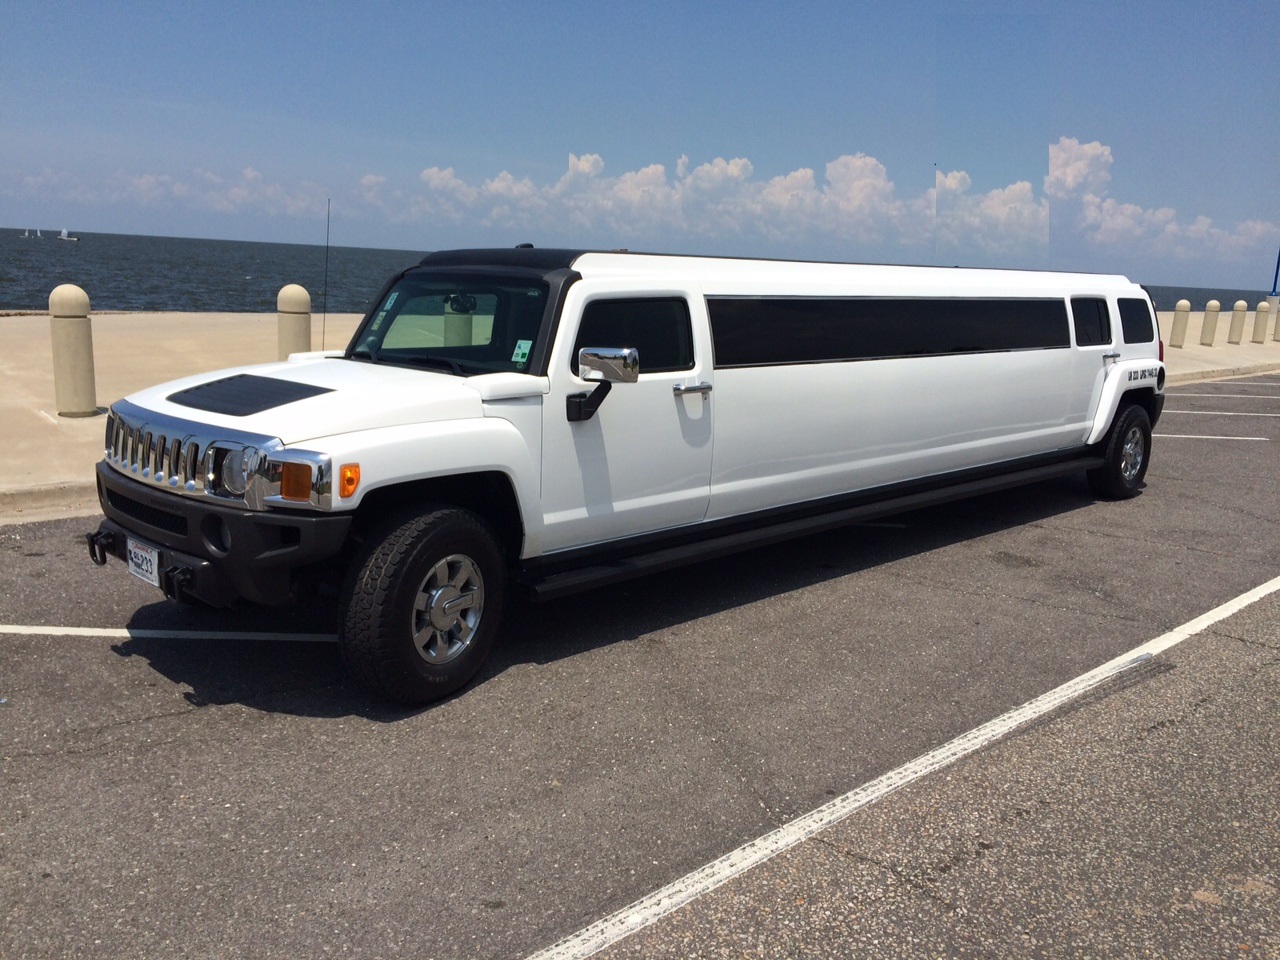 Stretch Hummer10/12 pax
Hummer /
Metairie, LA

 / Hourly $0.00
